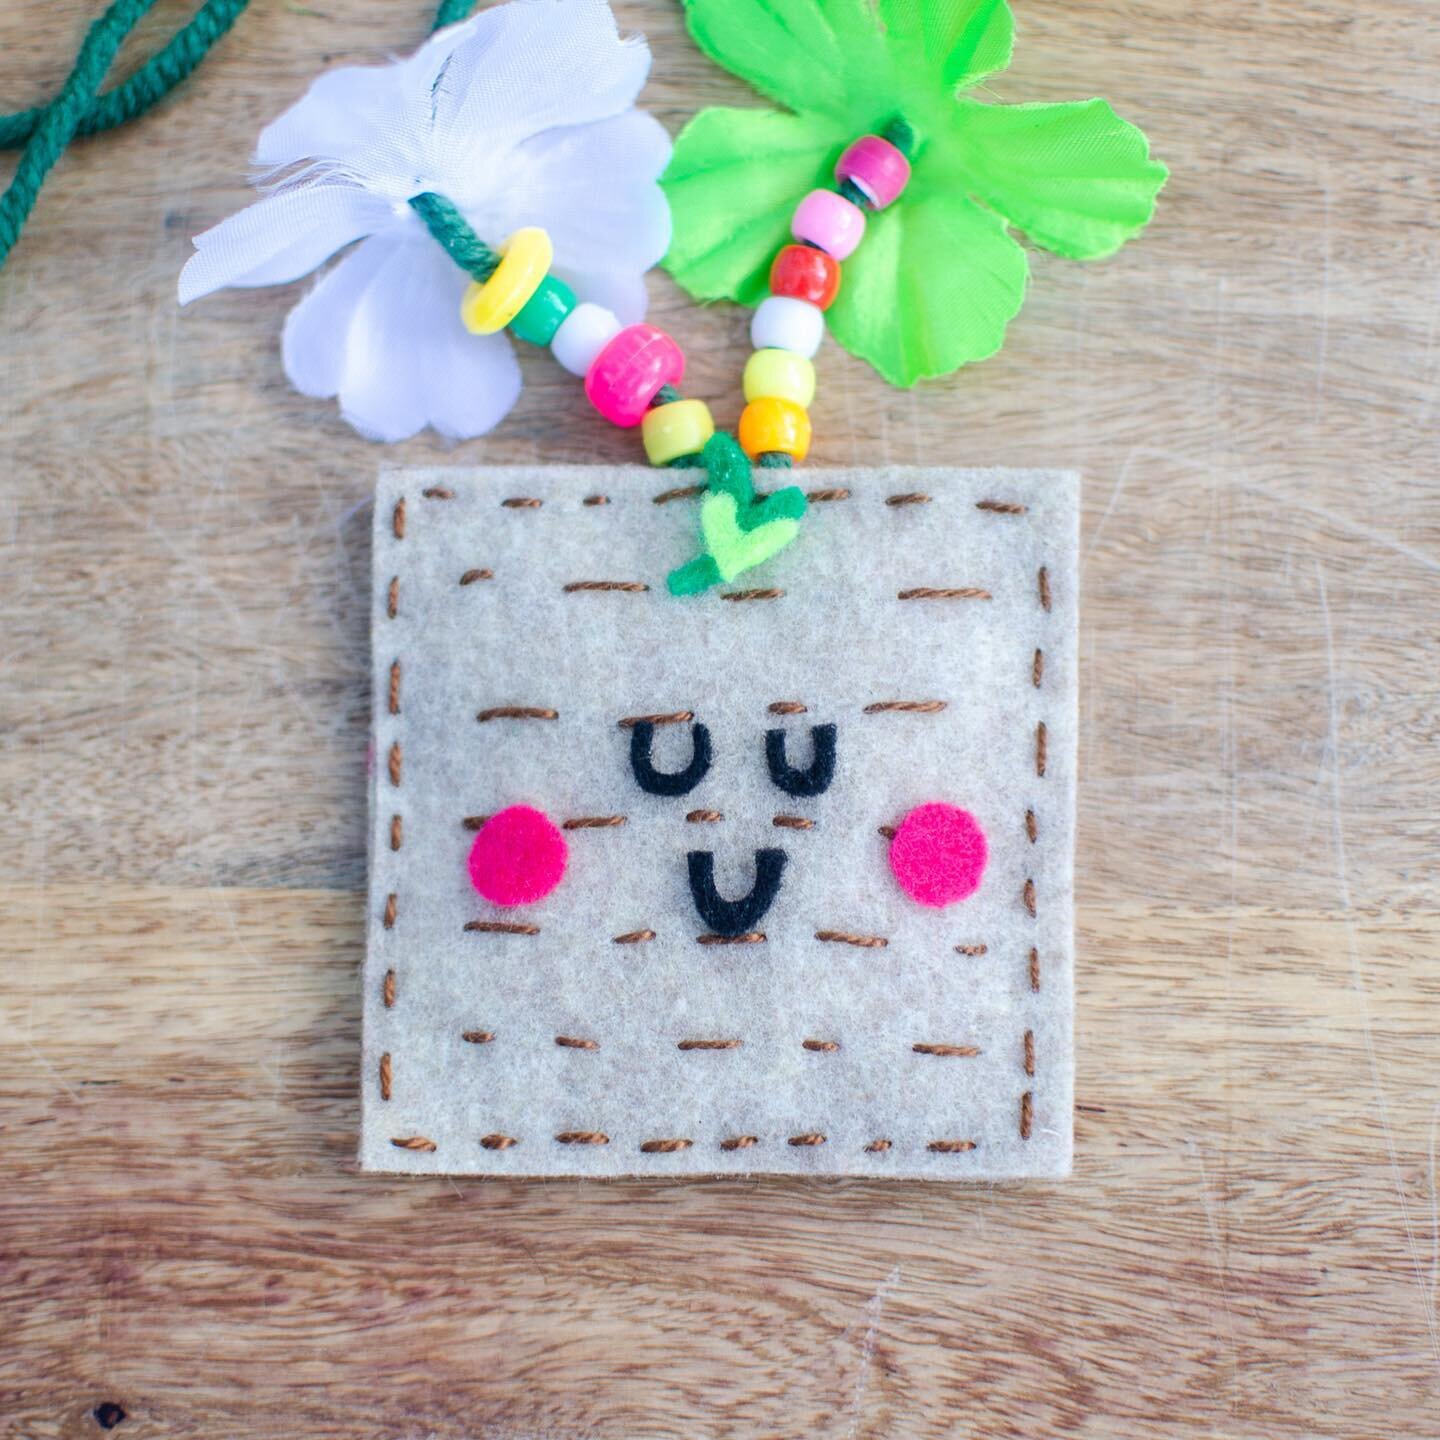 A Simple Pipe Cleaner Craft: Tic Tac Toe! - creative jewish mom